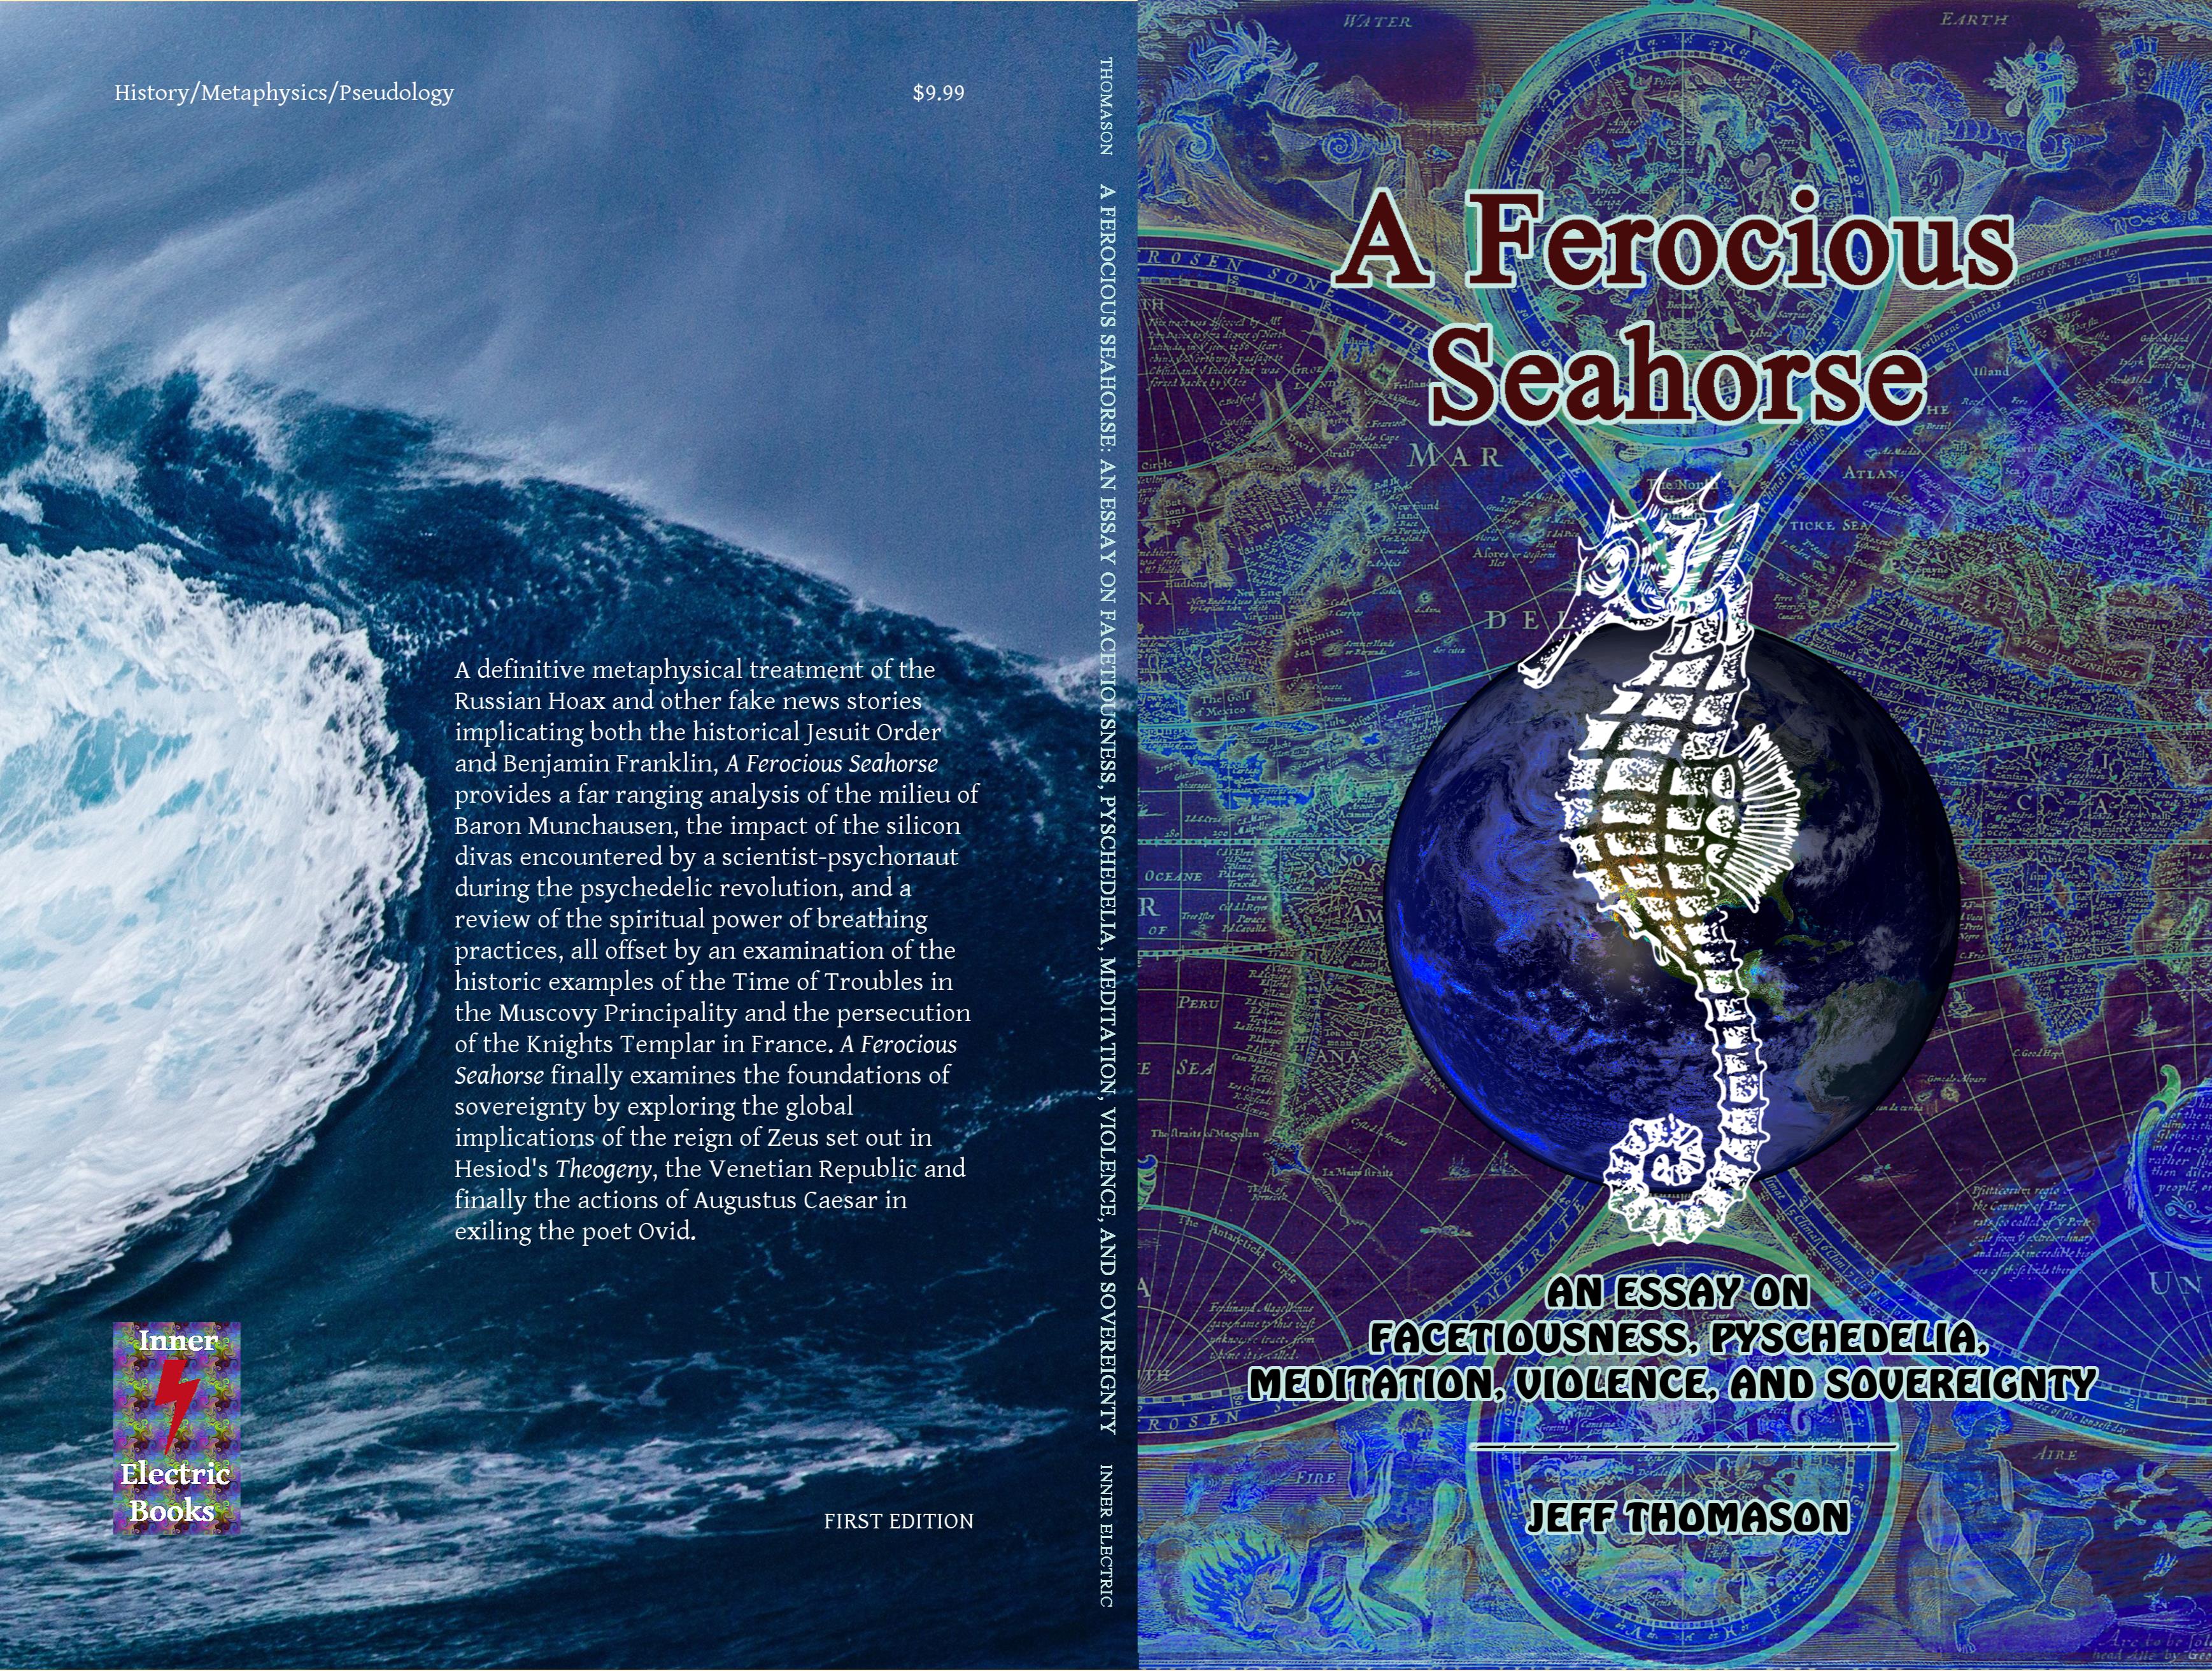 A Ferocious Seahorse: An Essay on Facetiousness, Psychedelia, Meditation, Violence, and Sovereignty cover image